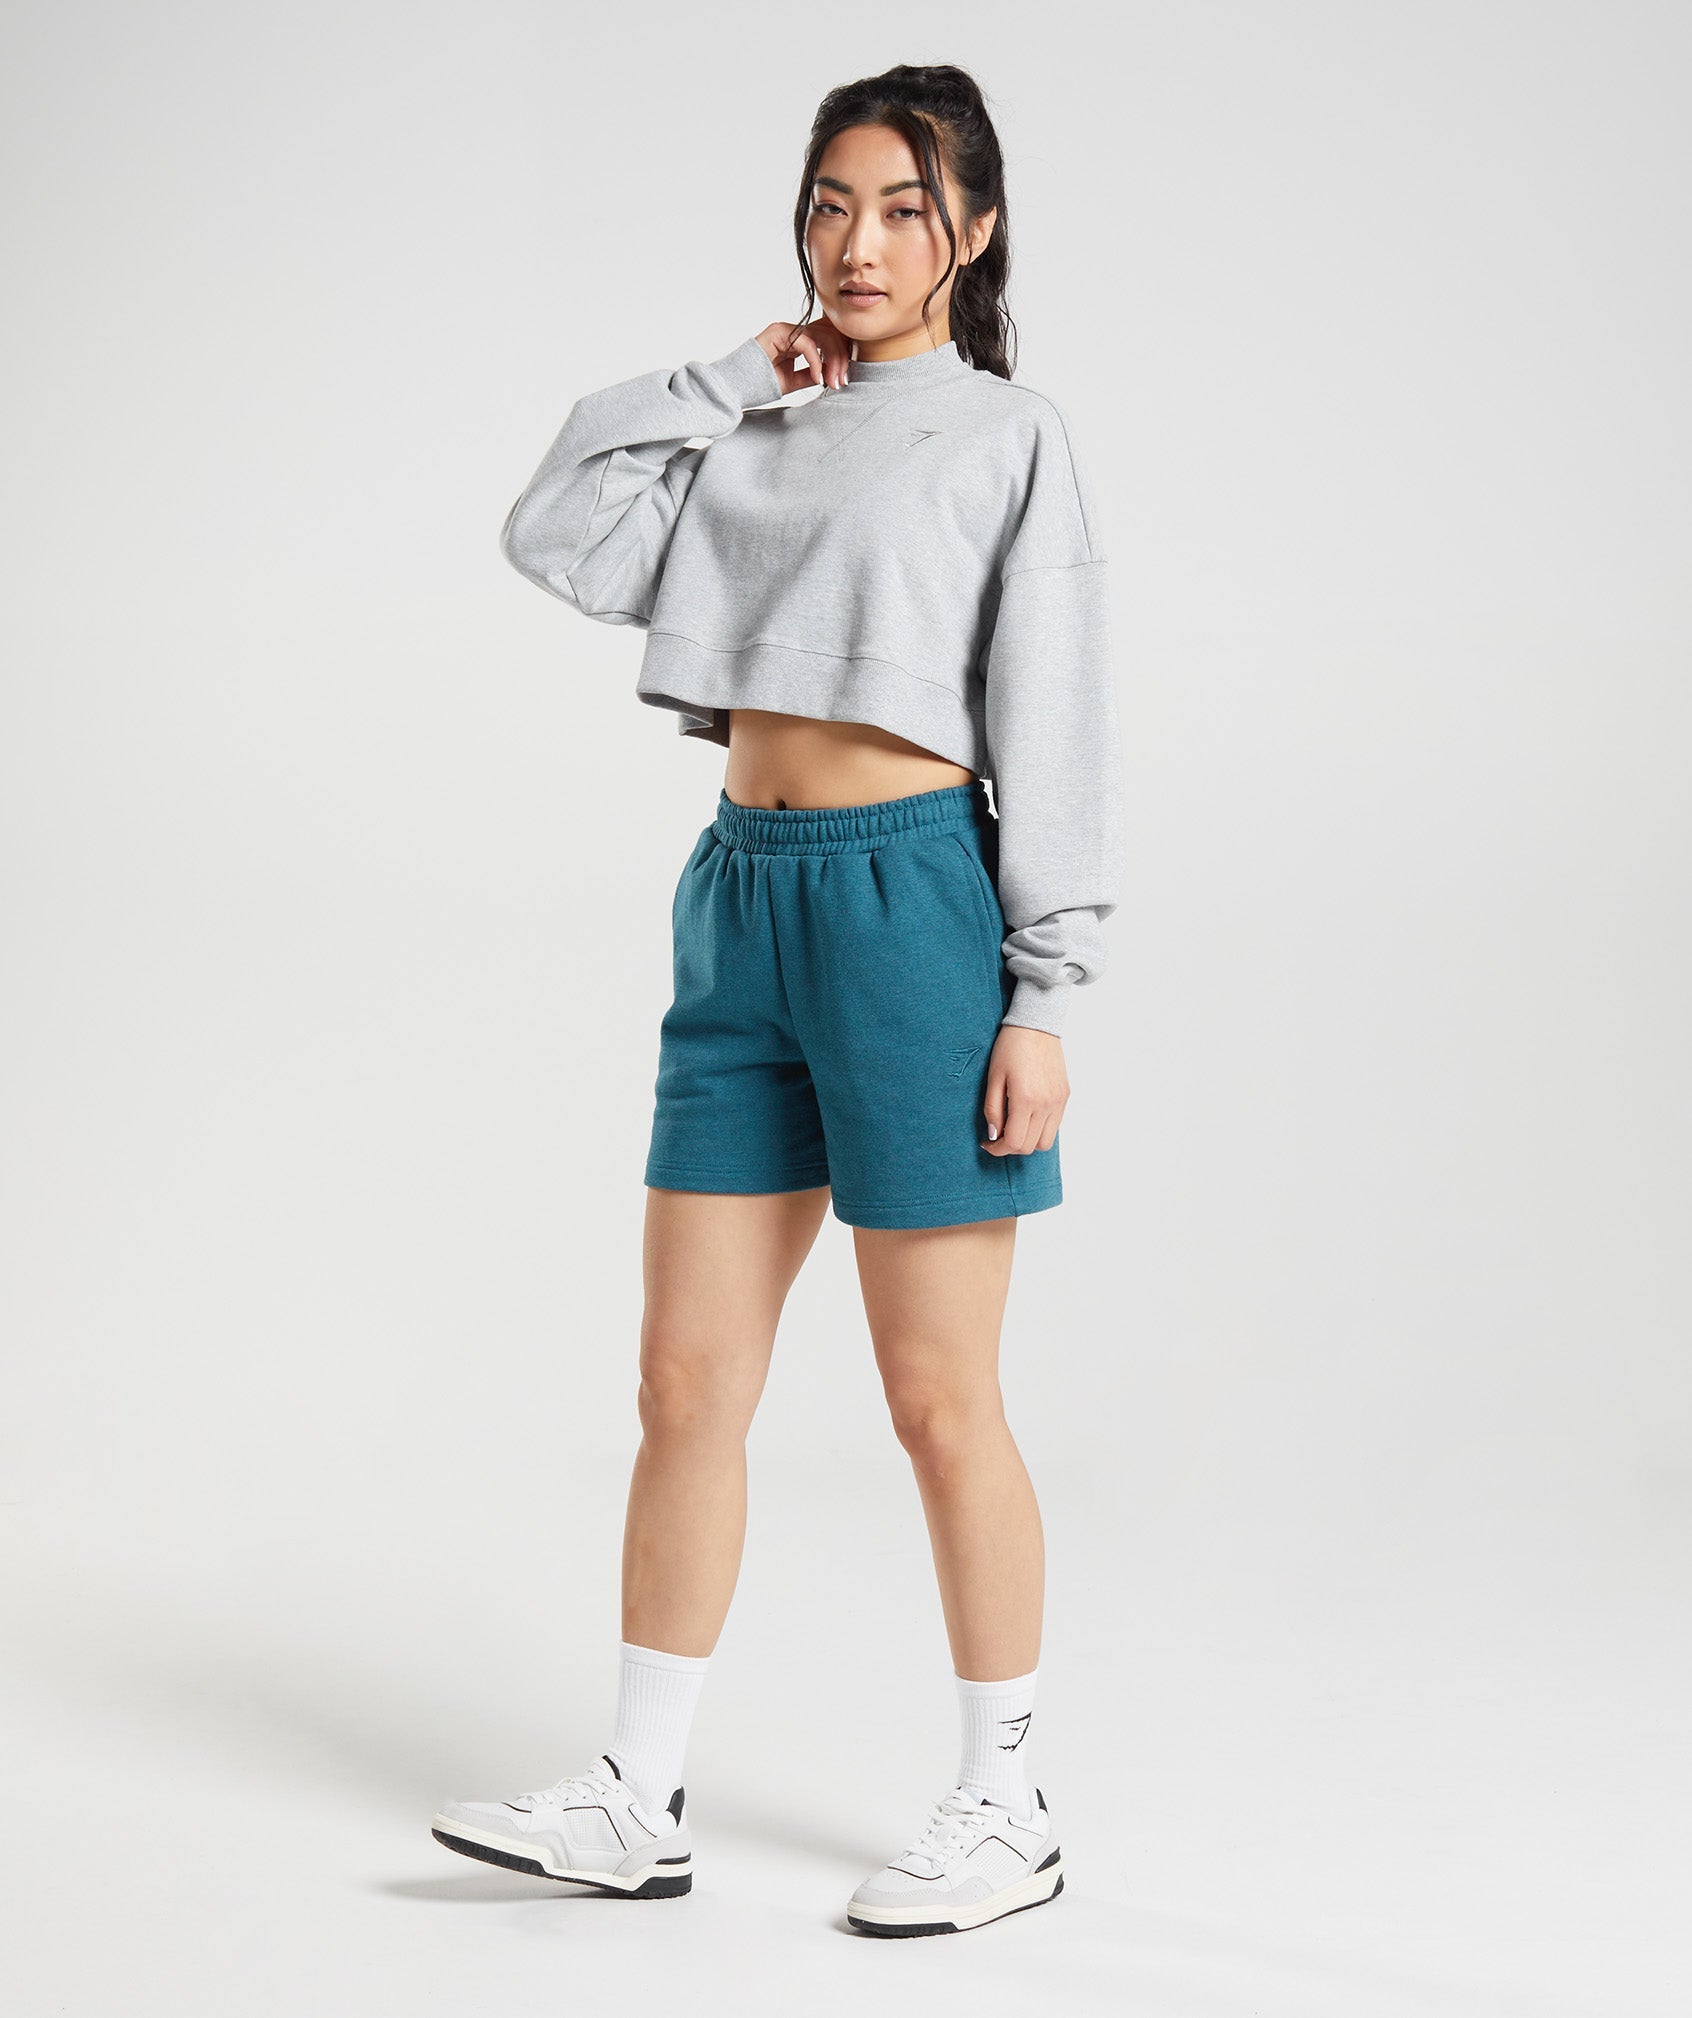 Rest Day Sweats Cropped Pullover in Light Grey Core Marl - view 4